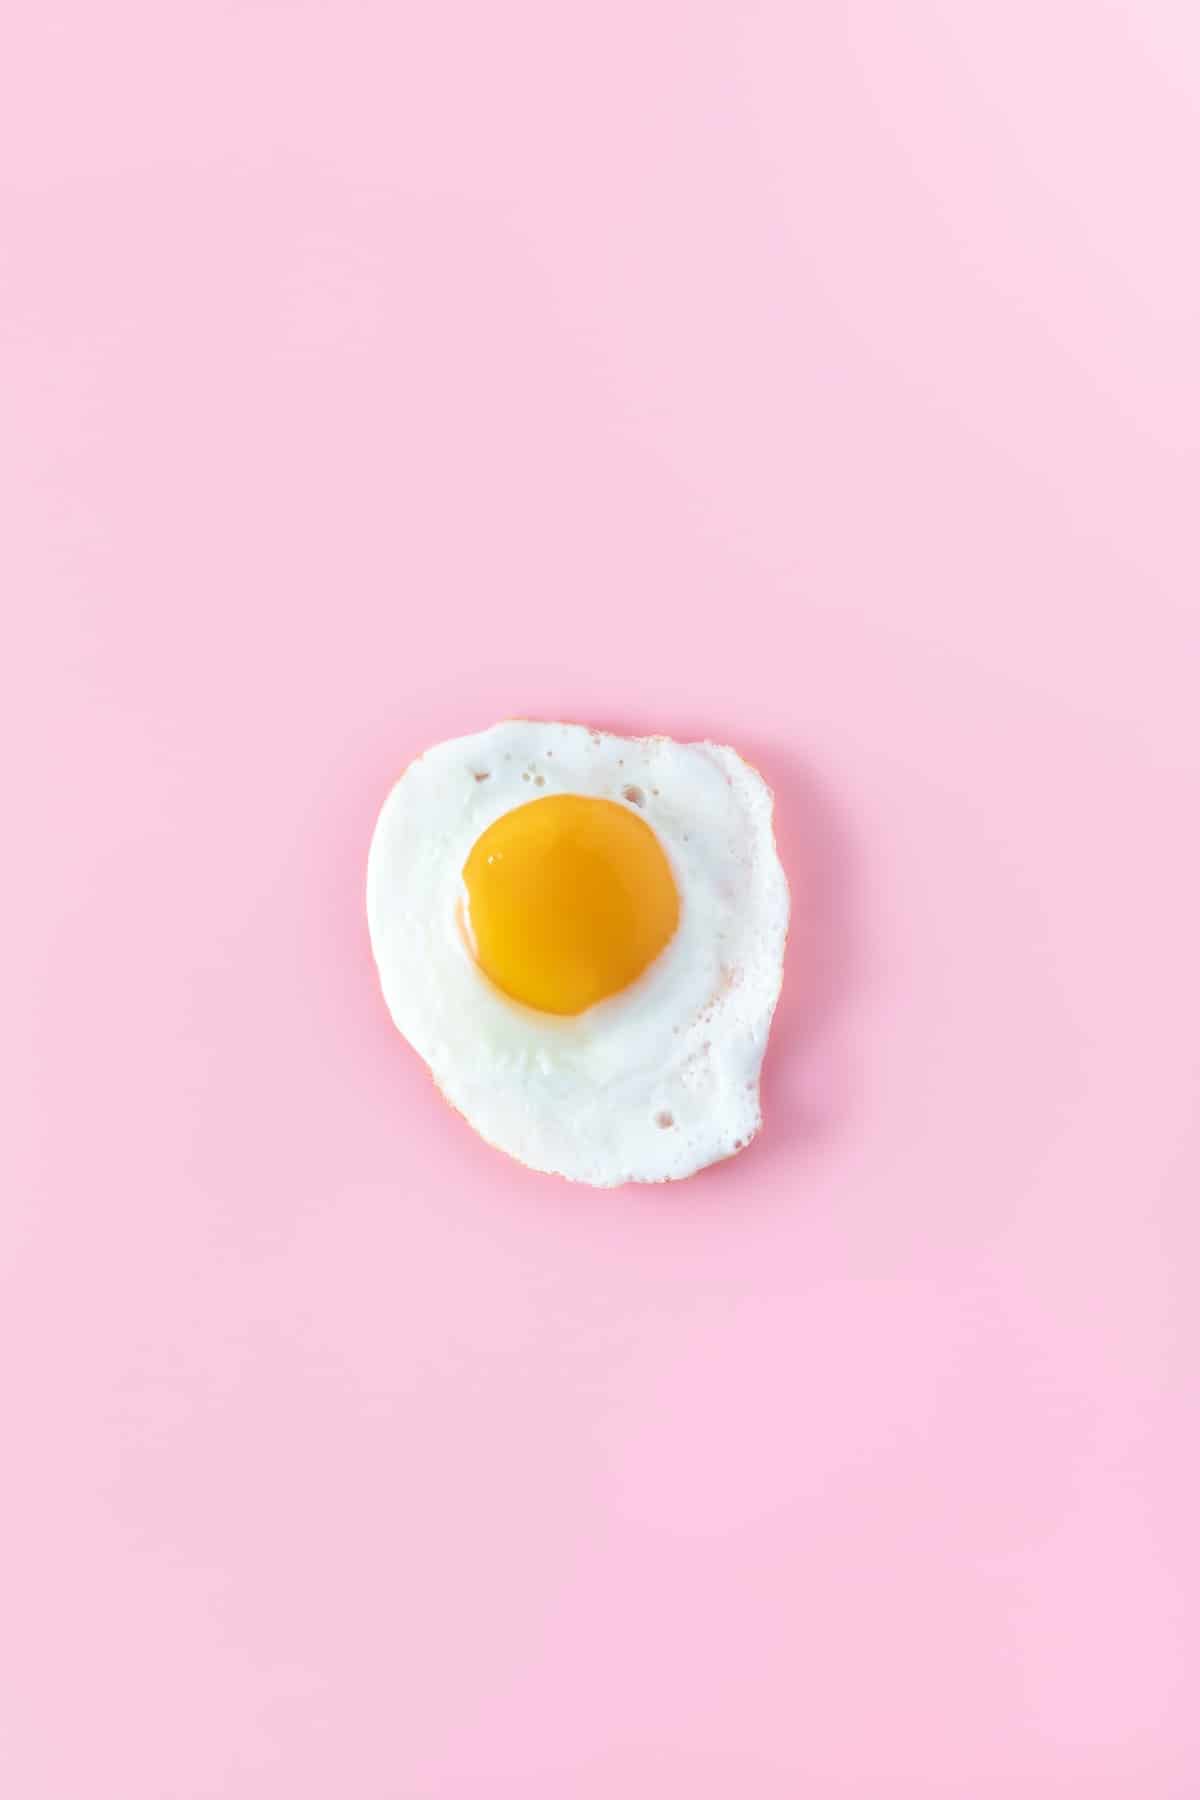 An overhead shot of a fried egg on a pink background.